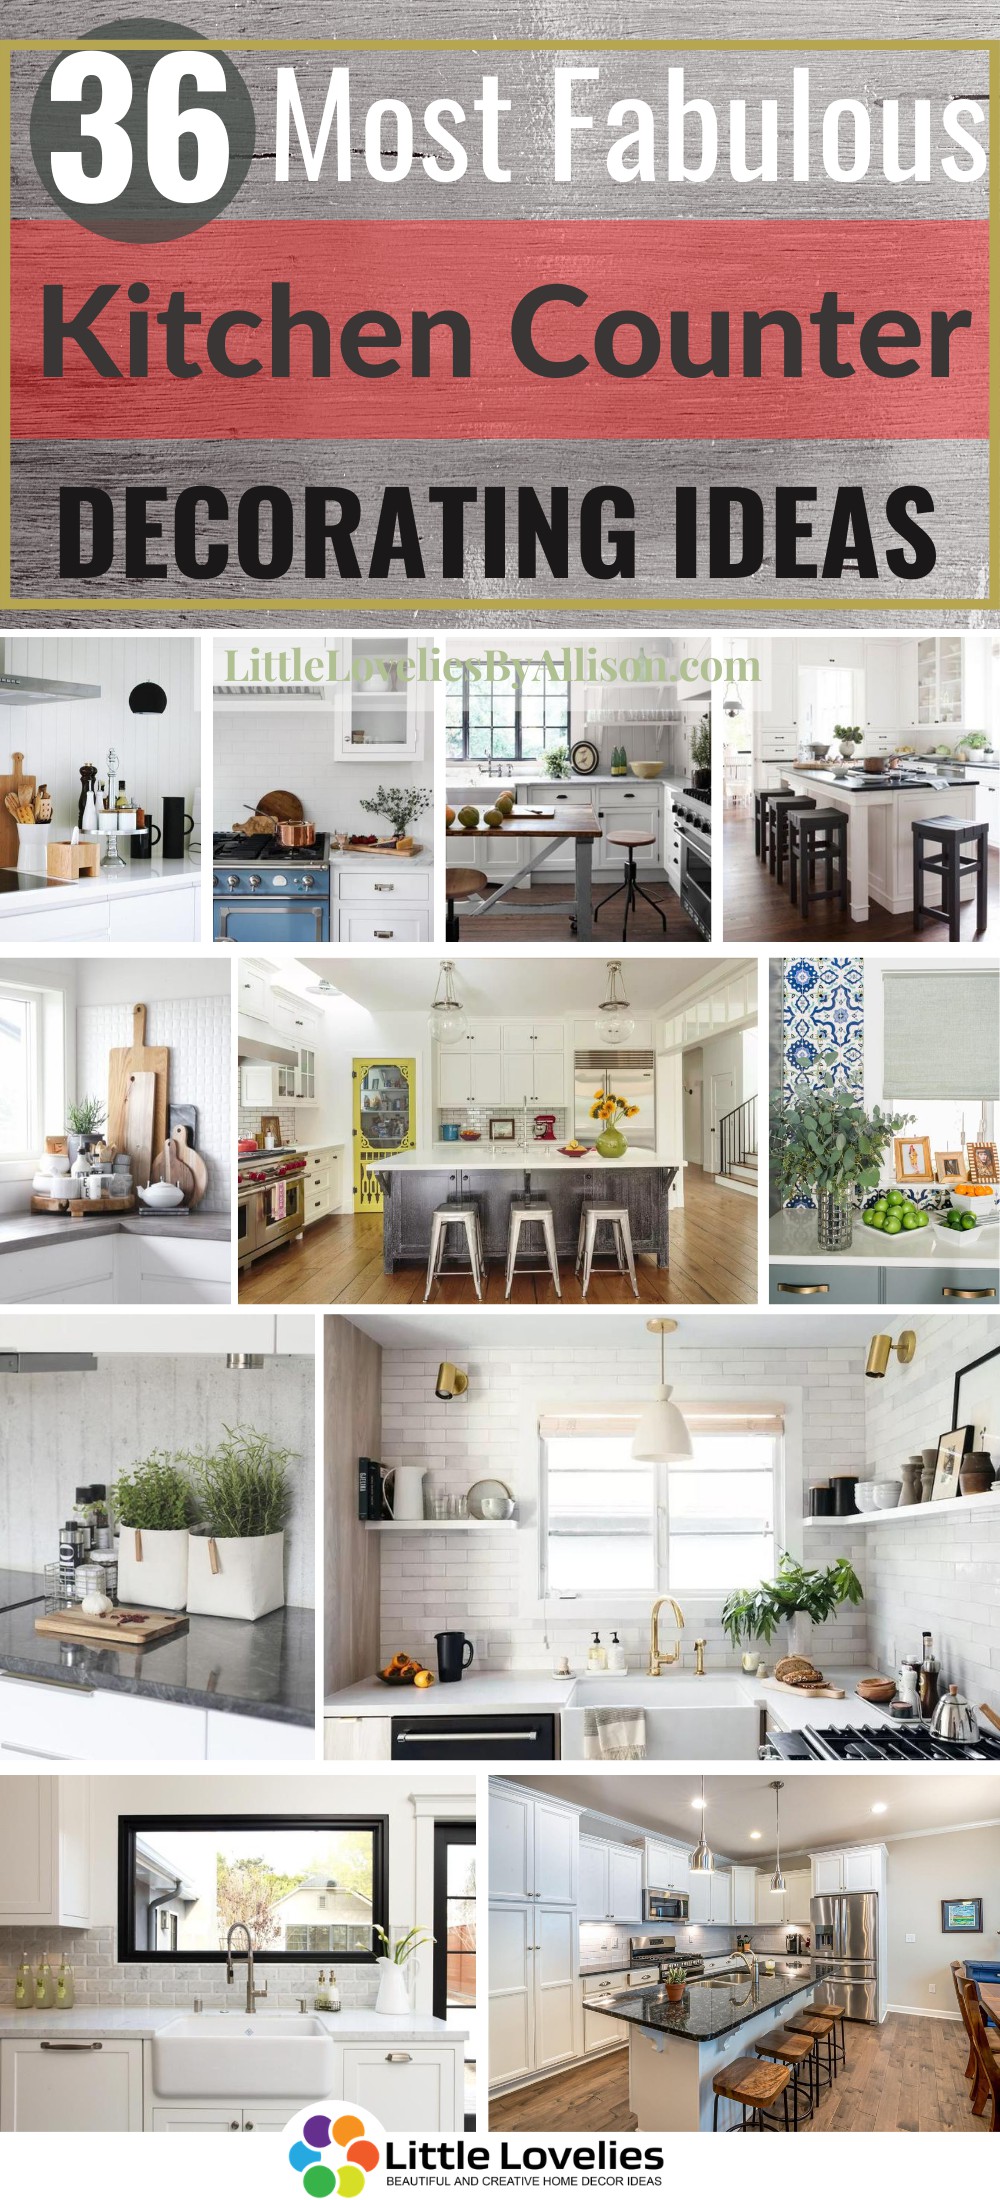 18 Of The Most Fabulous Kitchen Counter Decorating Ideas